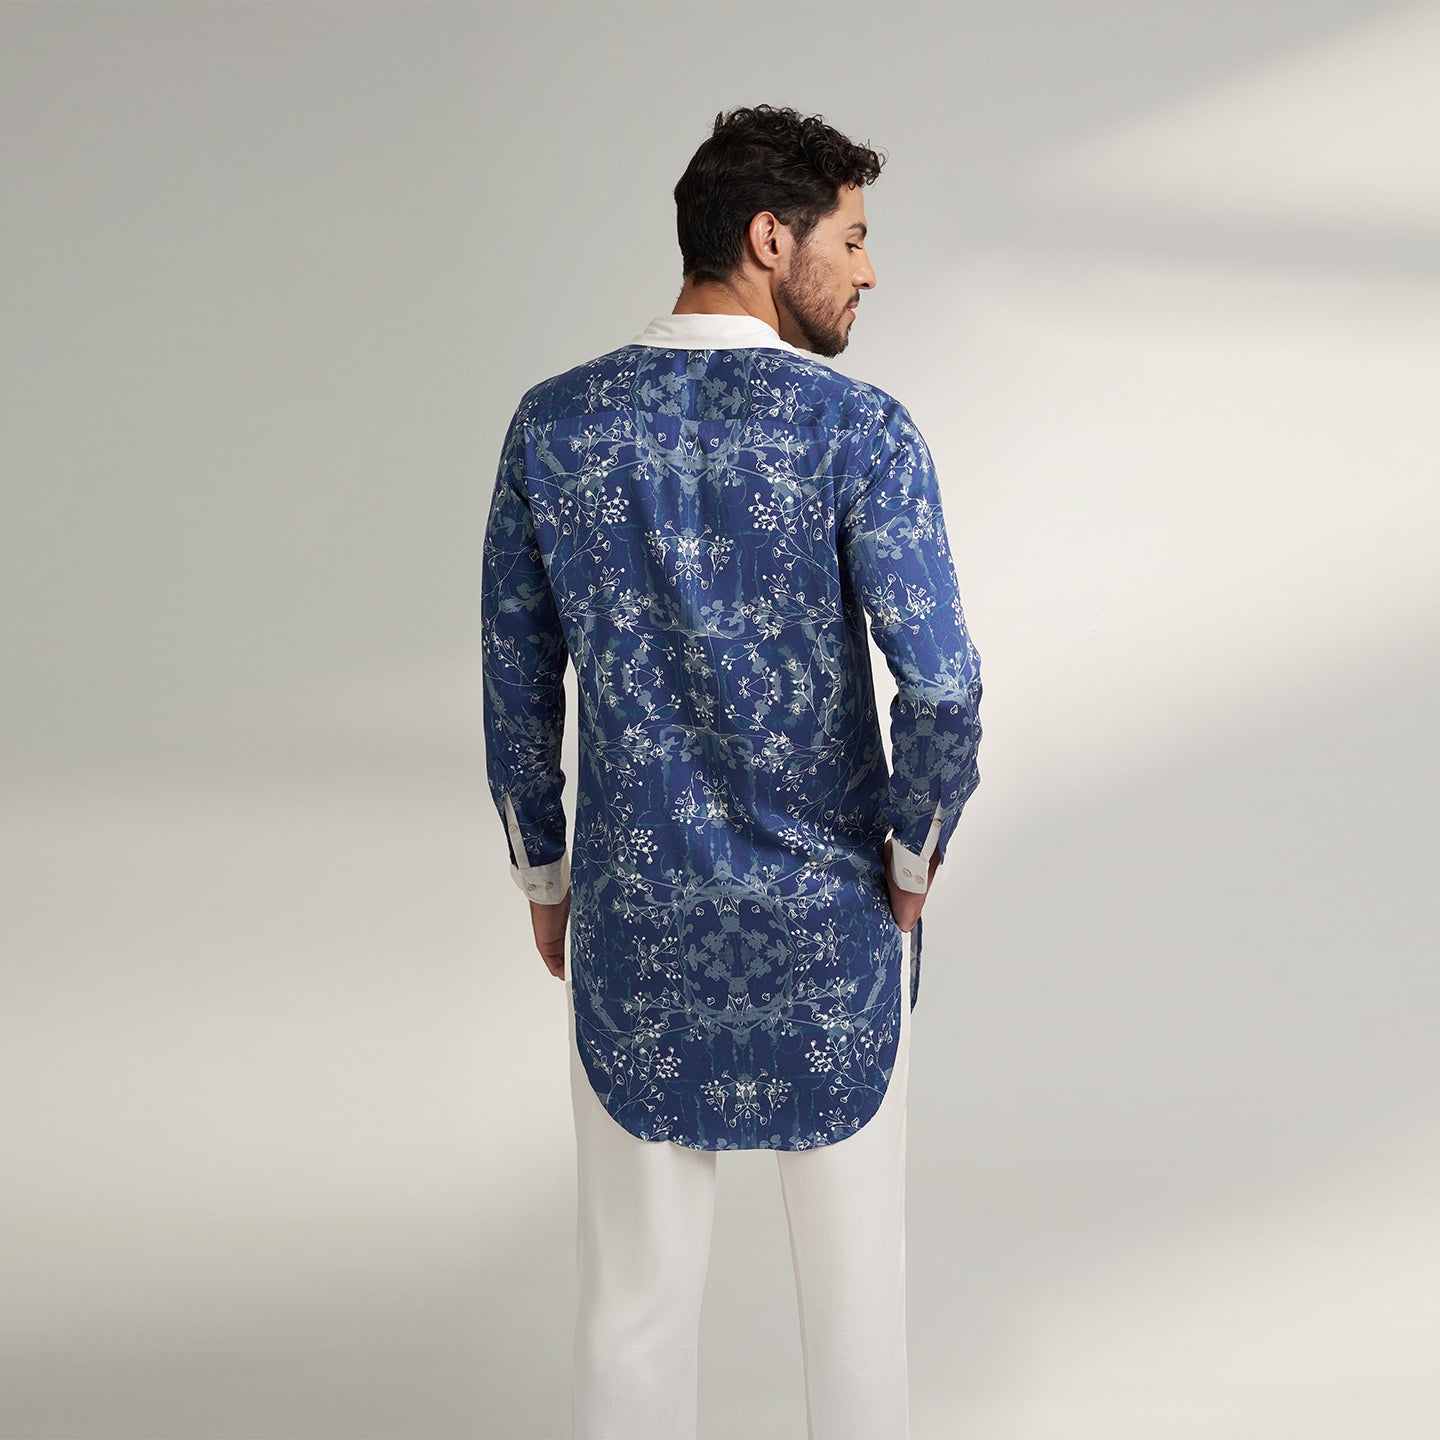 A long cuban collar shirt printed in blue and white made from organic lotus stem fabric white solid cuff and collar in white. the shirt has a comfort fit and it falls at mid thing